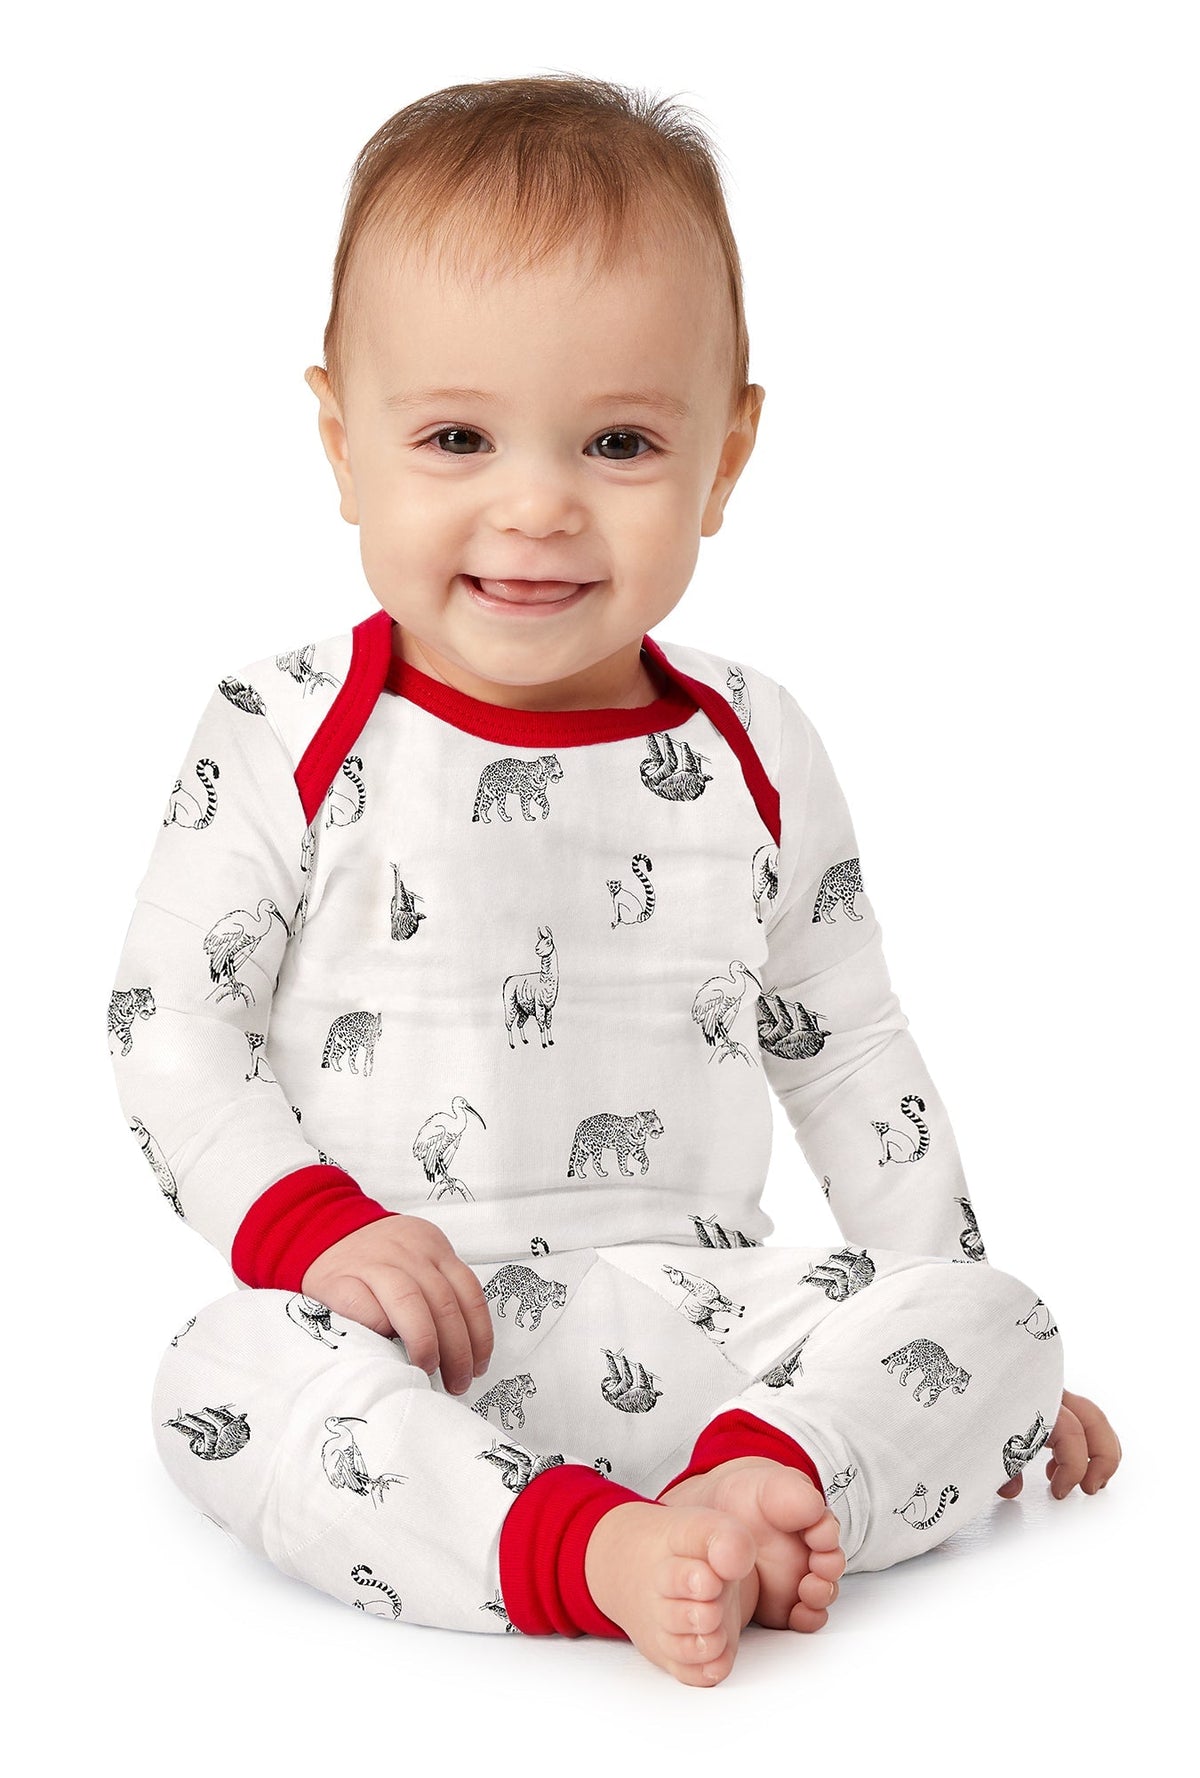 A baby wearing white long sleeve pj set with animal print